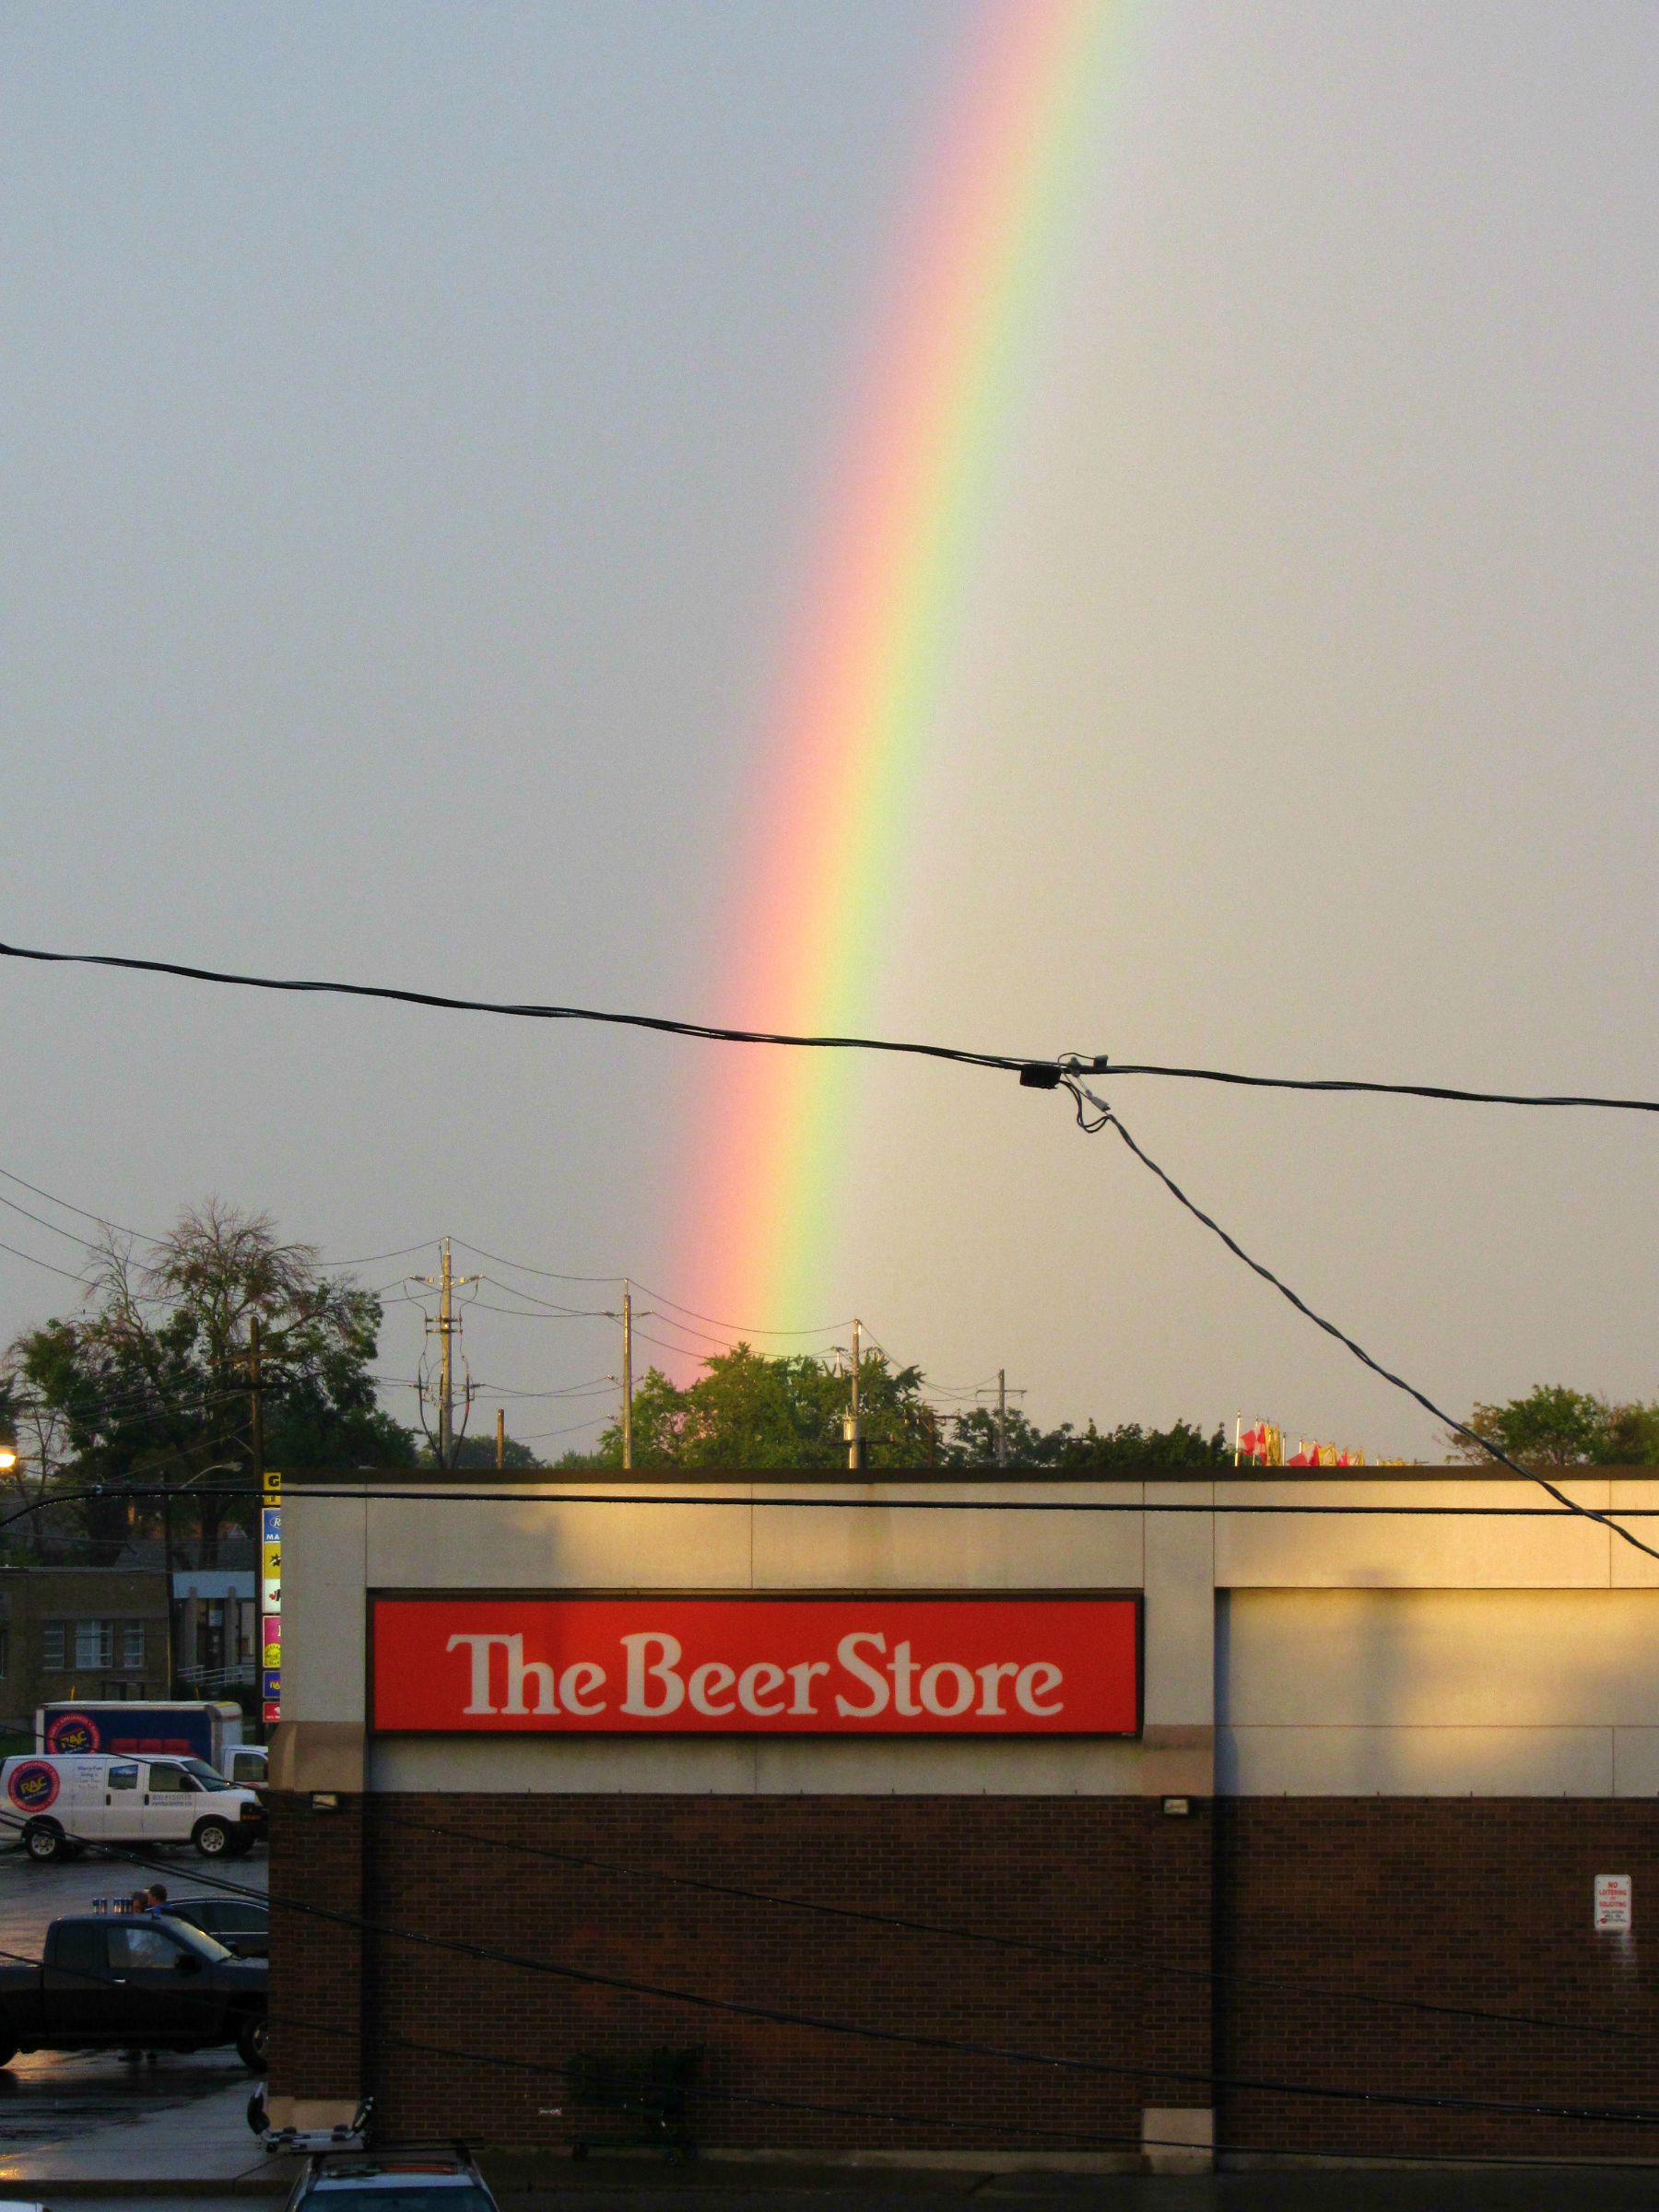 We all know where the rainbow REALLY ends.